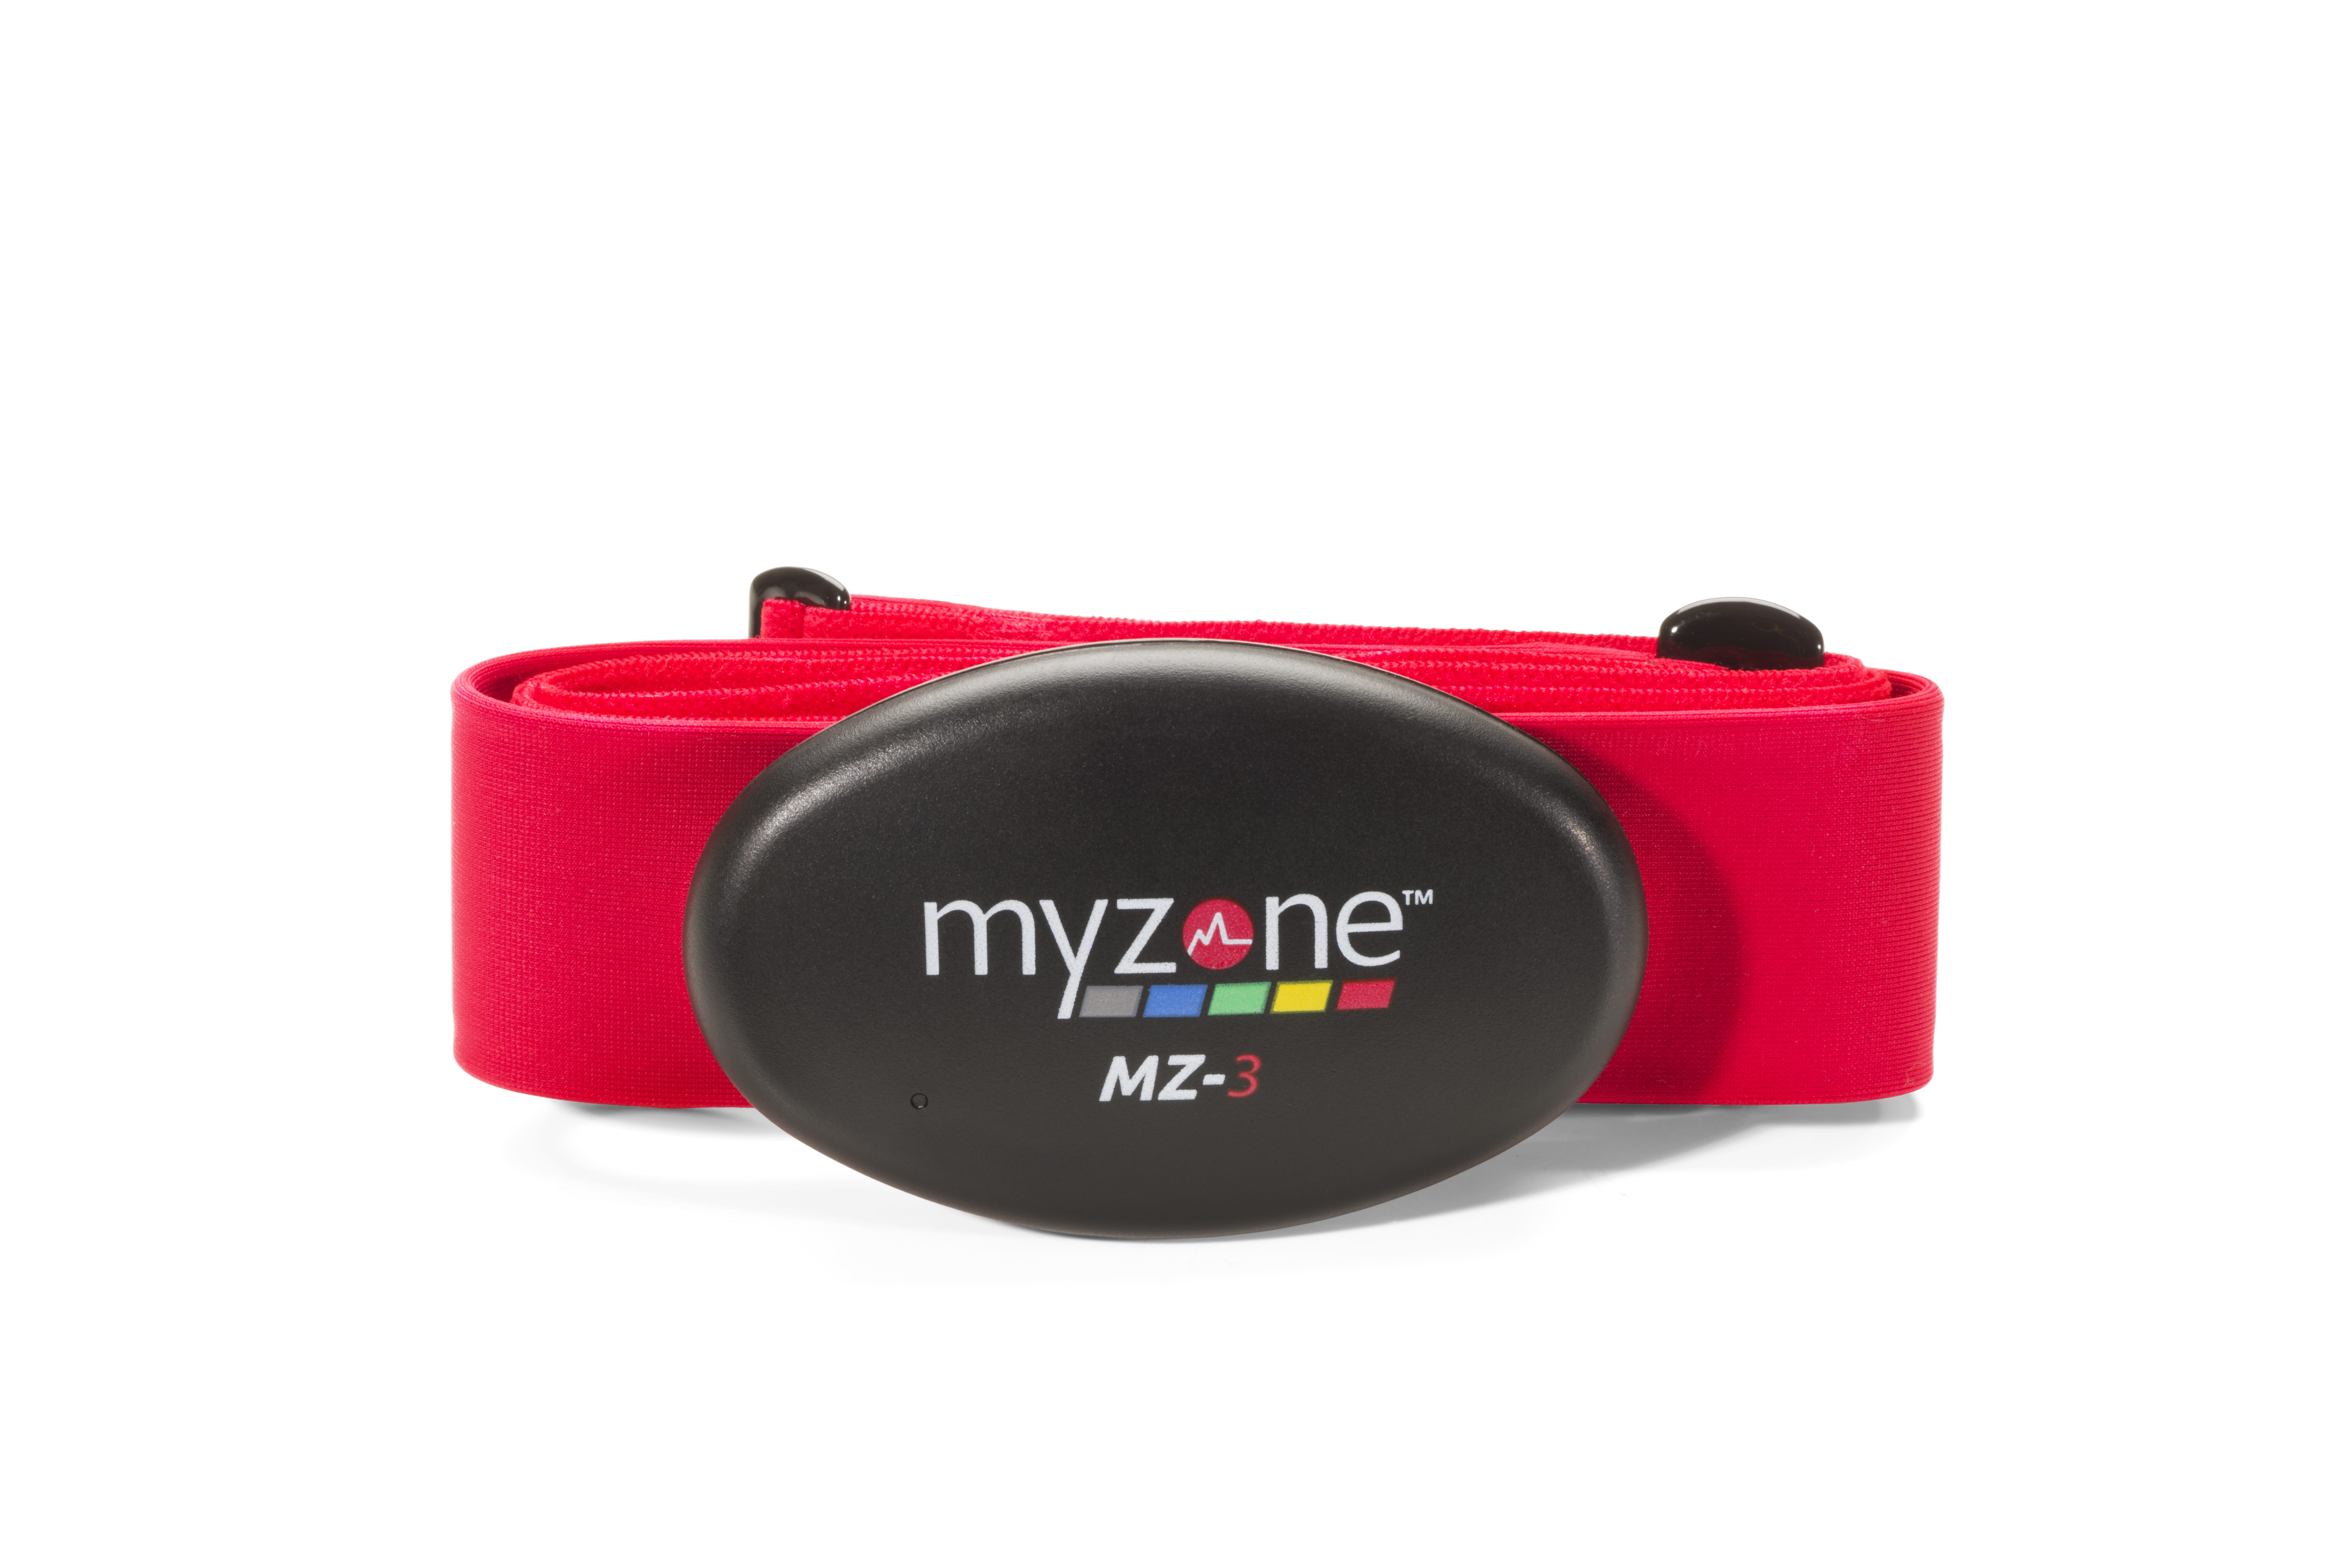 Myzone MZ-3 heart rate monitor at crossfit9 st pete fl